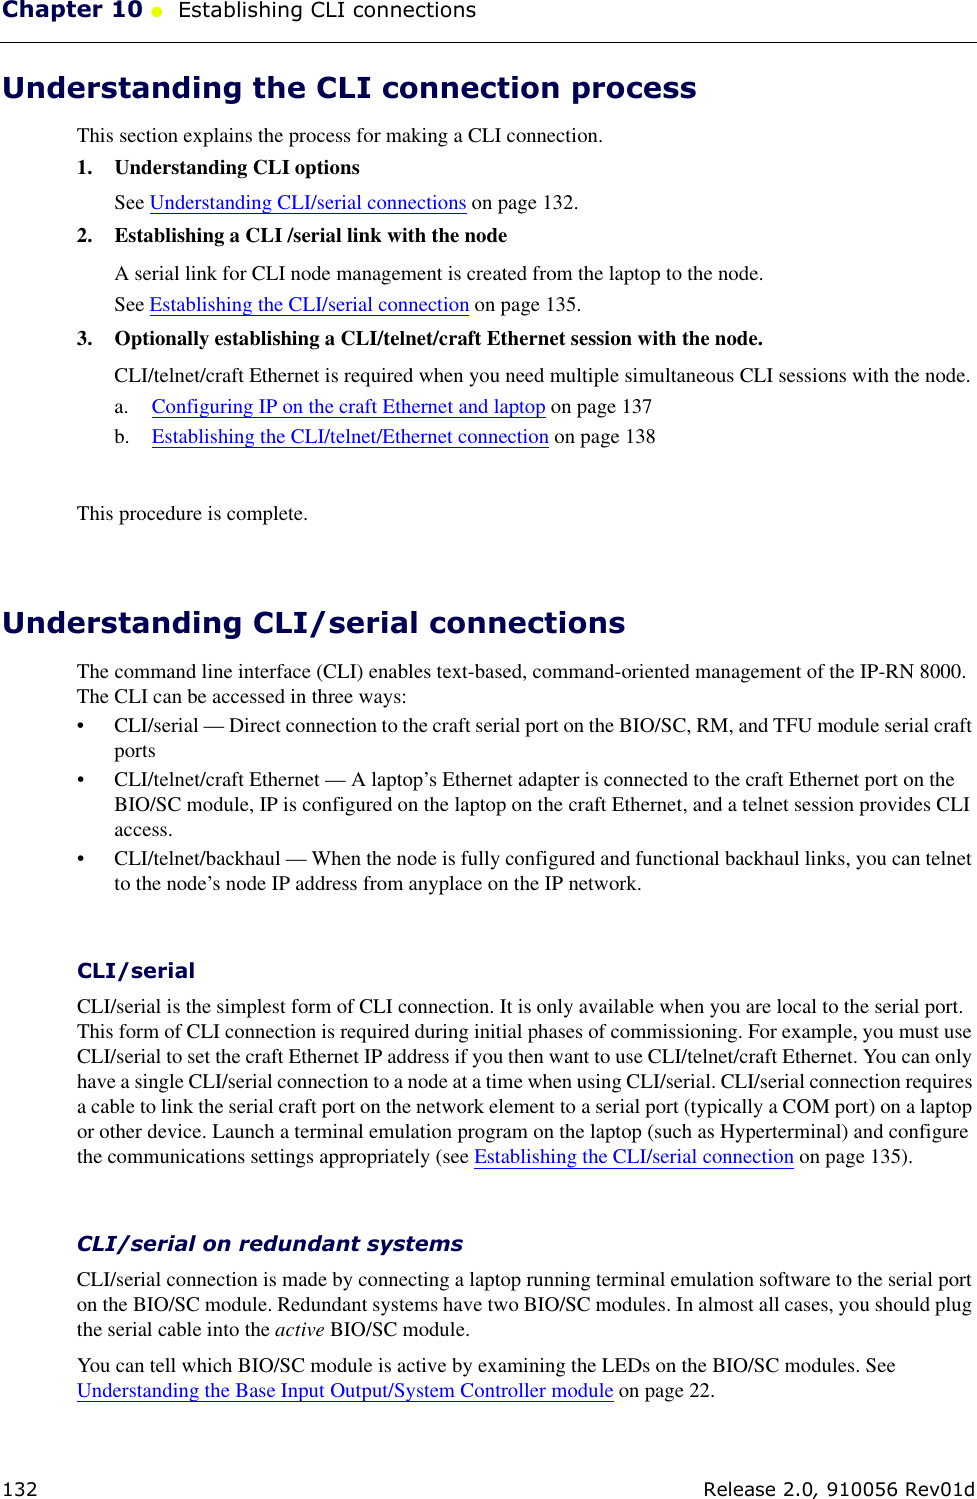 Chapter 10 ●  Establishing CLI connections132 Release 2.0, 910056 Rev01dUnderstanding the CLI connection processThis section explains the process for making a CLI connection. 1. Understanding CLI optionsSee Understanding CLI/serial connections on page 132.2. Establishing a CLI /serial link with the nodeA serial link for CLI node management is created from the laptop to the node.See Establishing the CLI/serial connection on page 135.3. Optionally establishing a CLI/telnet/craft Ethernet session with the node.CLI/telnet/craft Ethernet is required when you need multiple simultaneous CLI sessions with the node.a. Configuring IP on the craft Ethernet and laptop on page 137b. Establishing the CLI/telnet/Ethernet connection on page 138This procedure is complete. Understanding CLI/serial connectionsThe command line interface (CLI) enables text-based, command-oriented management of the IP-RN 8000. The CLI can be accessed in three ways:• CLI/serial — Direct connection to the craft serial port on the BIO/SC, RM, and TFU module serial craft ports• CLI/telnet/craft Ethernet — A laptop’s Ethernet adapter is connected to the craft Ethernet port on the BIO/SC module, IP is configured on the laptop on the craft Ethernet, and a telnet session provides CLI access.• CLI/telnet/backhaul — When the node is fully configured and functional backhaul links, you can telnet to the node’s node IP address from anyplace on the IP network.CLI/serialCLI/serial is the simplest form of CLI connection. It is only available when you are local to the serial port. This form of CLI connection is required during initial phases of commissioning. For example, you must use CLI/serial to set the craft Ethernet IP address if you then want to use CLI/telnet/craft Ethernet. You can only have a single CLI/serial connection to a node at a time when using CLI/serial. CLI/serial connection requires a cable to link the serial craft port on the network element to a serial port (typically a COM port) on a laptop or other device. Launch a terminal emulation program on the laptop (such as Hyperterminal) and configure the communications settings appropriately (see Establishing the CLI/serial connection on page 135).CLI/serial on redundant systemsCLI/serial connection is made by connecting a laptop running terminal emulation software to the serial port on the BIO/SC module. Redundant systems have two BIO/SC modules. In almost all cases, you should plug the serial cable into the active BIO/SC module. You can tell which BIO/SC module is active by examining the LEDs on the BIO/SC modules. See Understanding the Base Input Output/System Controller module on page 22. 